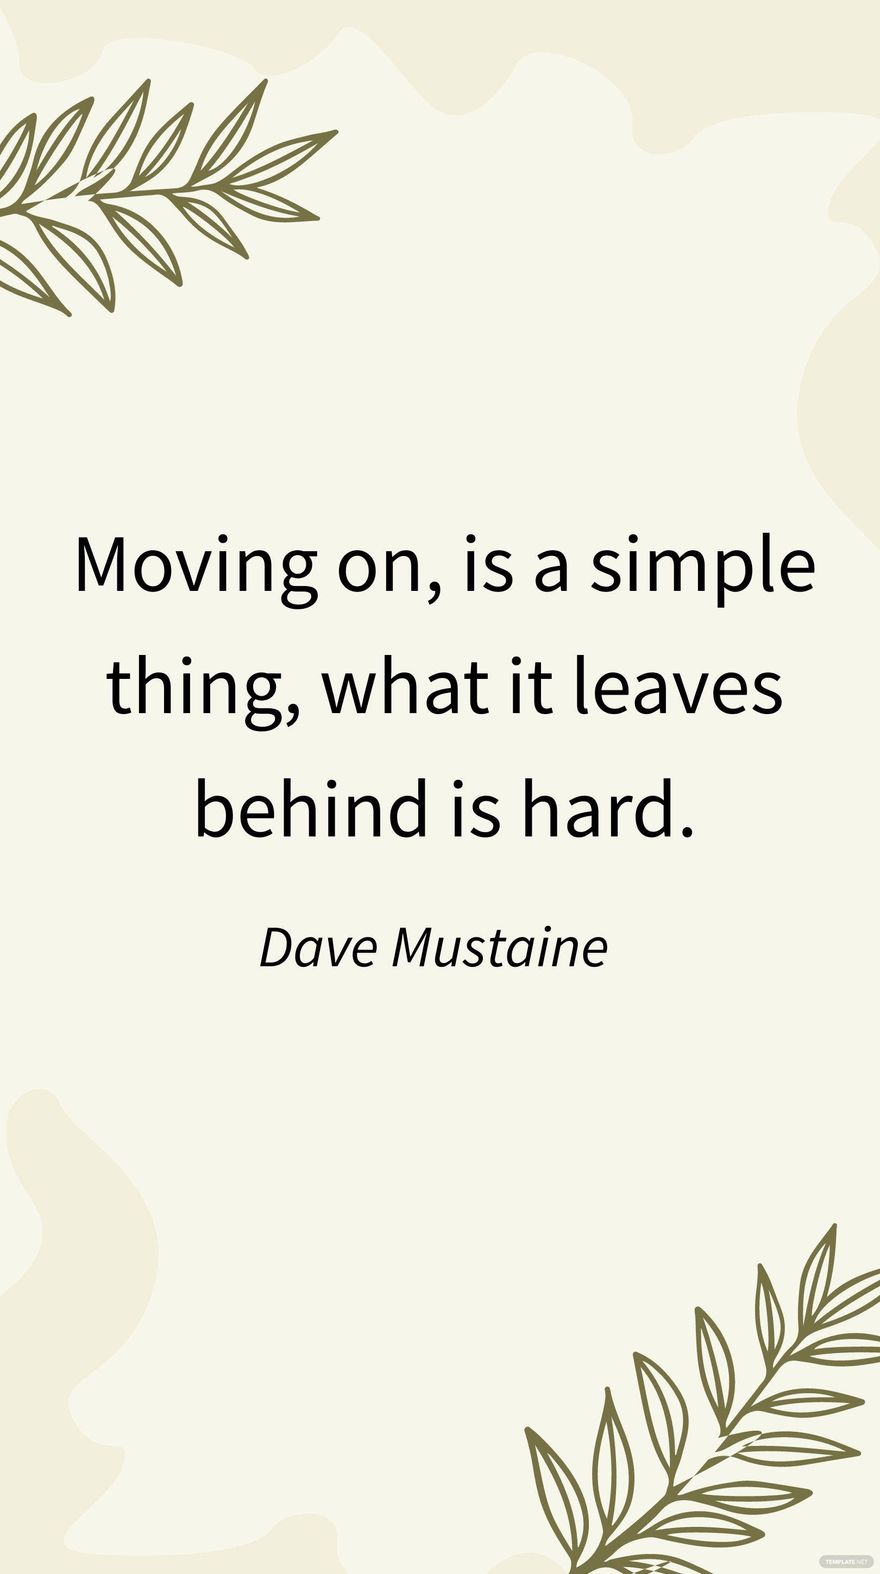 Free Dave Mustaine - Moving on, is a simple thing, what it leaves behind is hard. in JPG